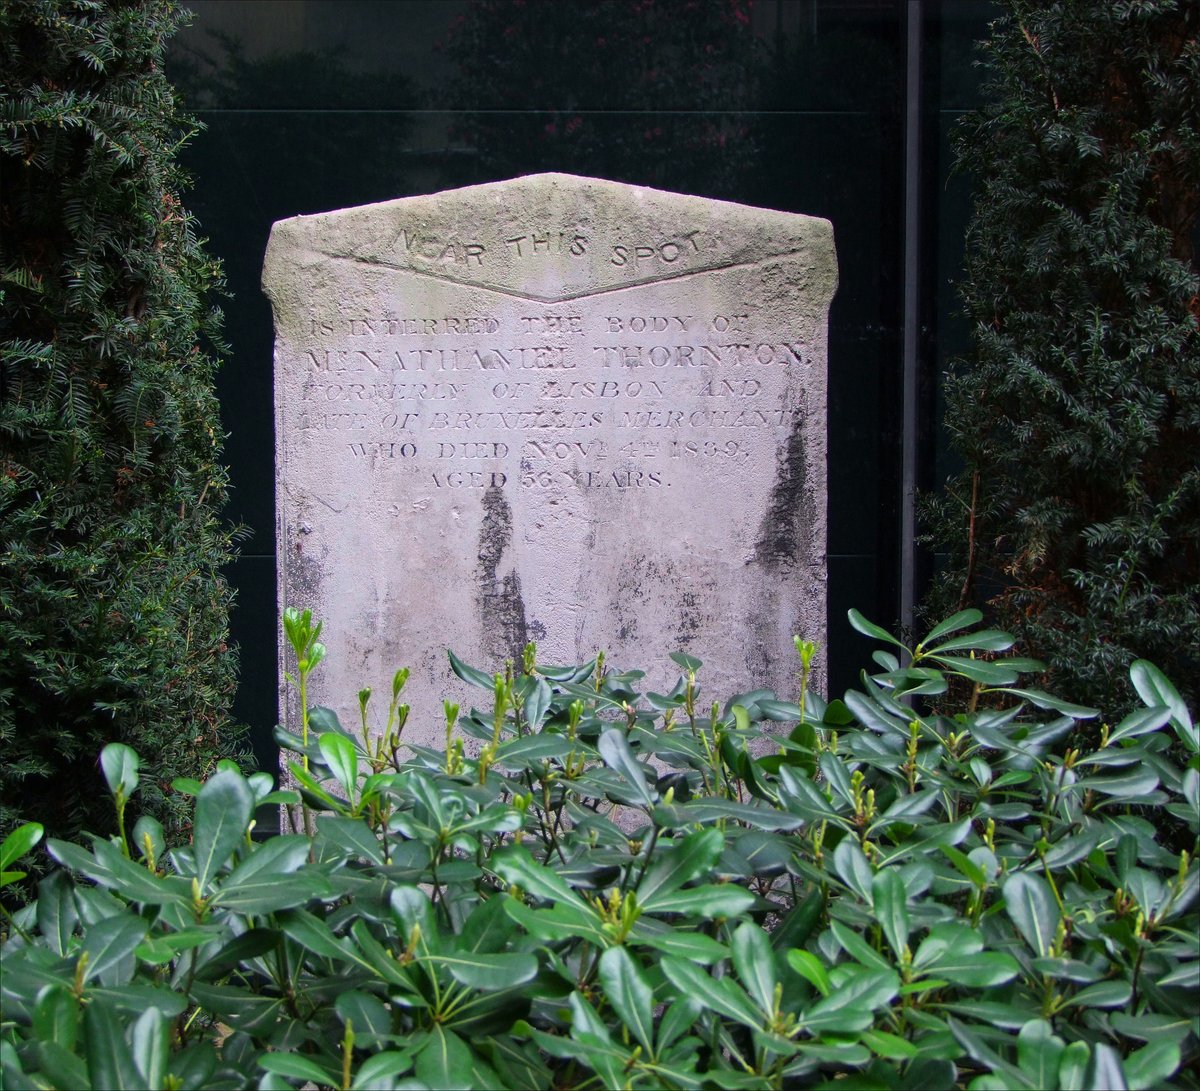 The former burial ground of St Swithin London Stone. Nathaniel Thornton, 'formerly of Lisbon and late of Bruxelles, merchant', still sleeps quietly among the tower blocks. http://www.simonknott.co.uk/citychurches/060/church.htm